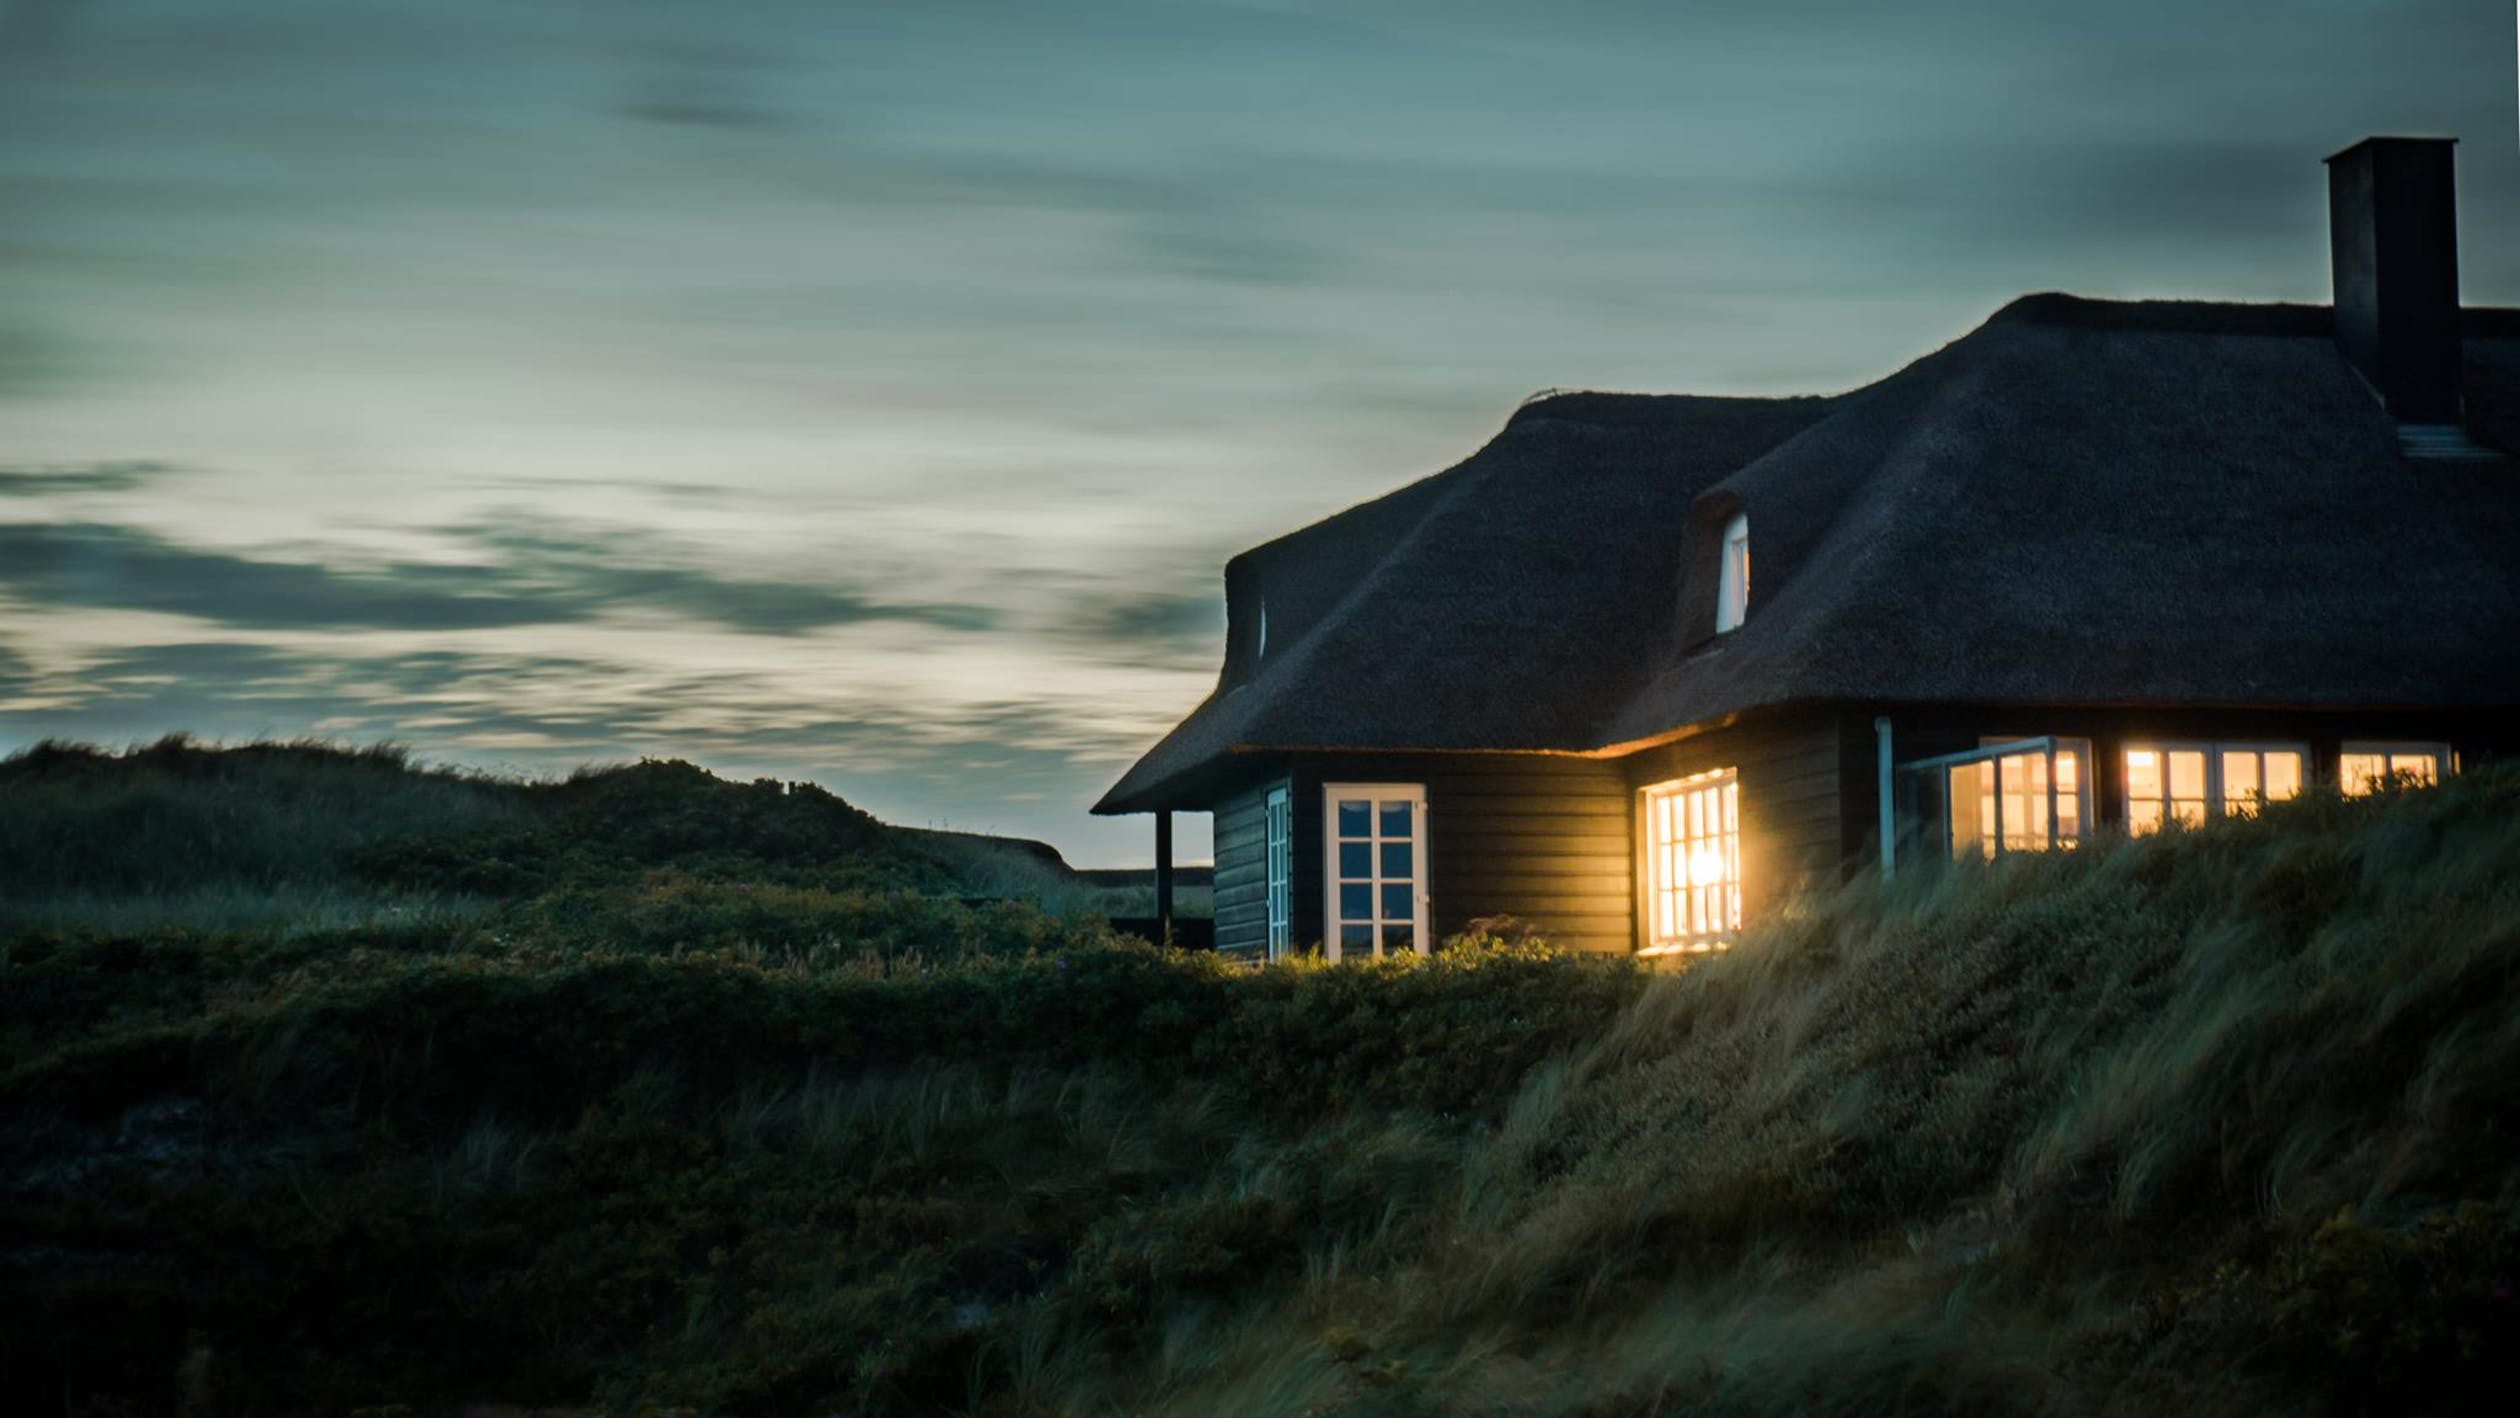 House at night with light shining.